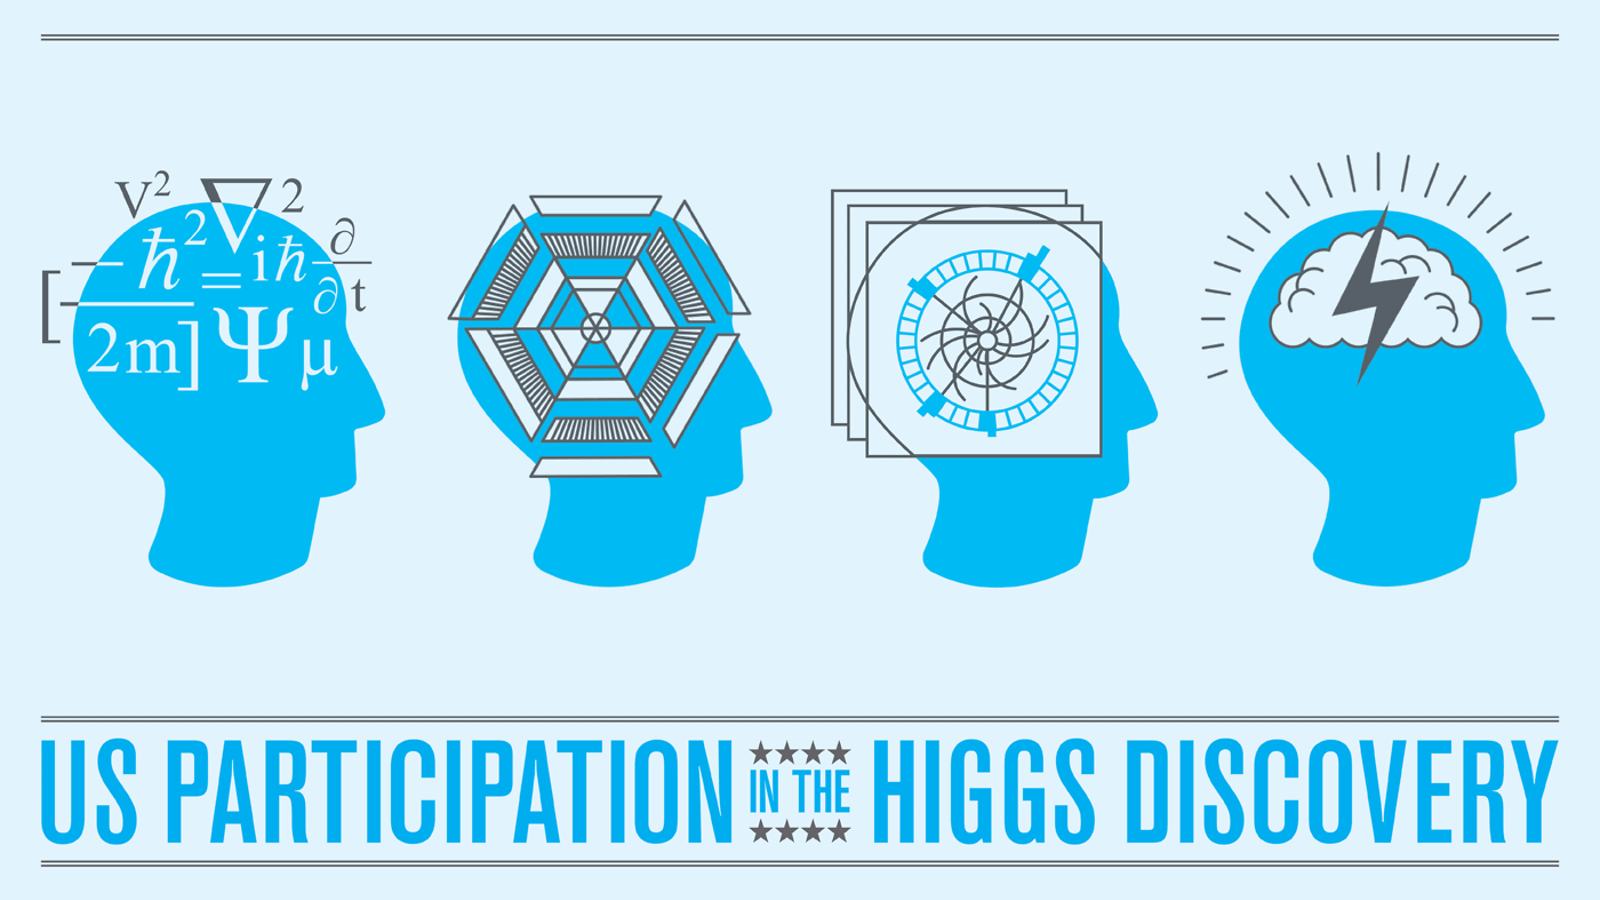 Illustration of four profiles "US Participation in the Higgs Discovery"